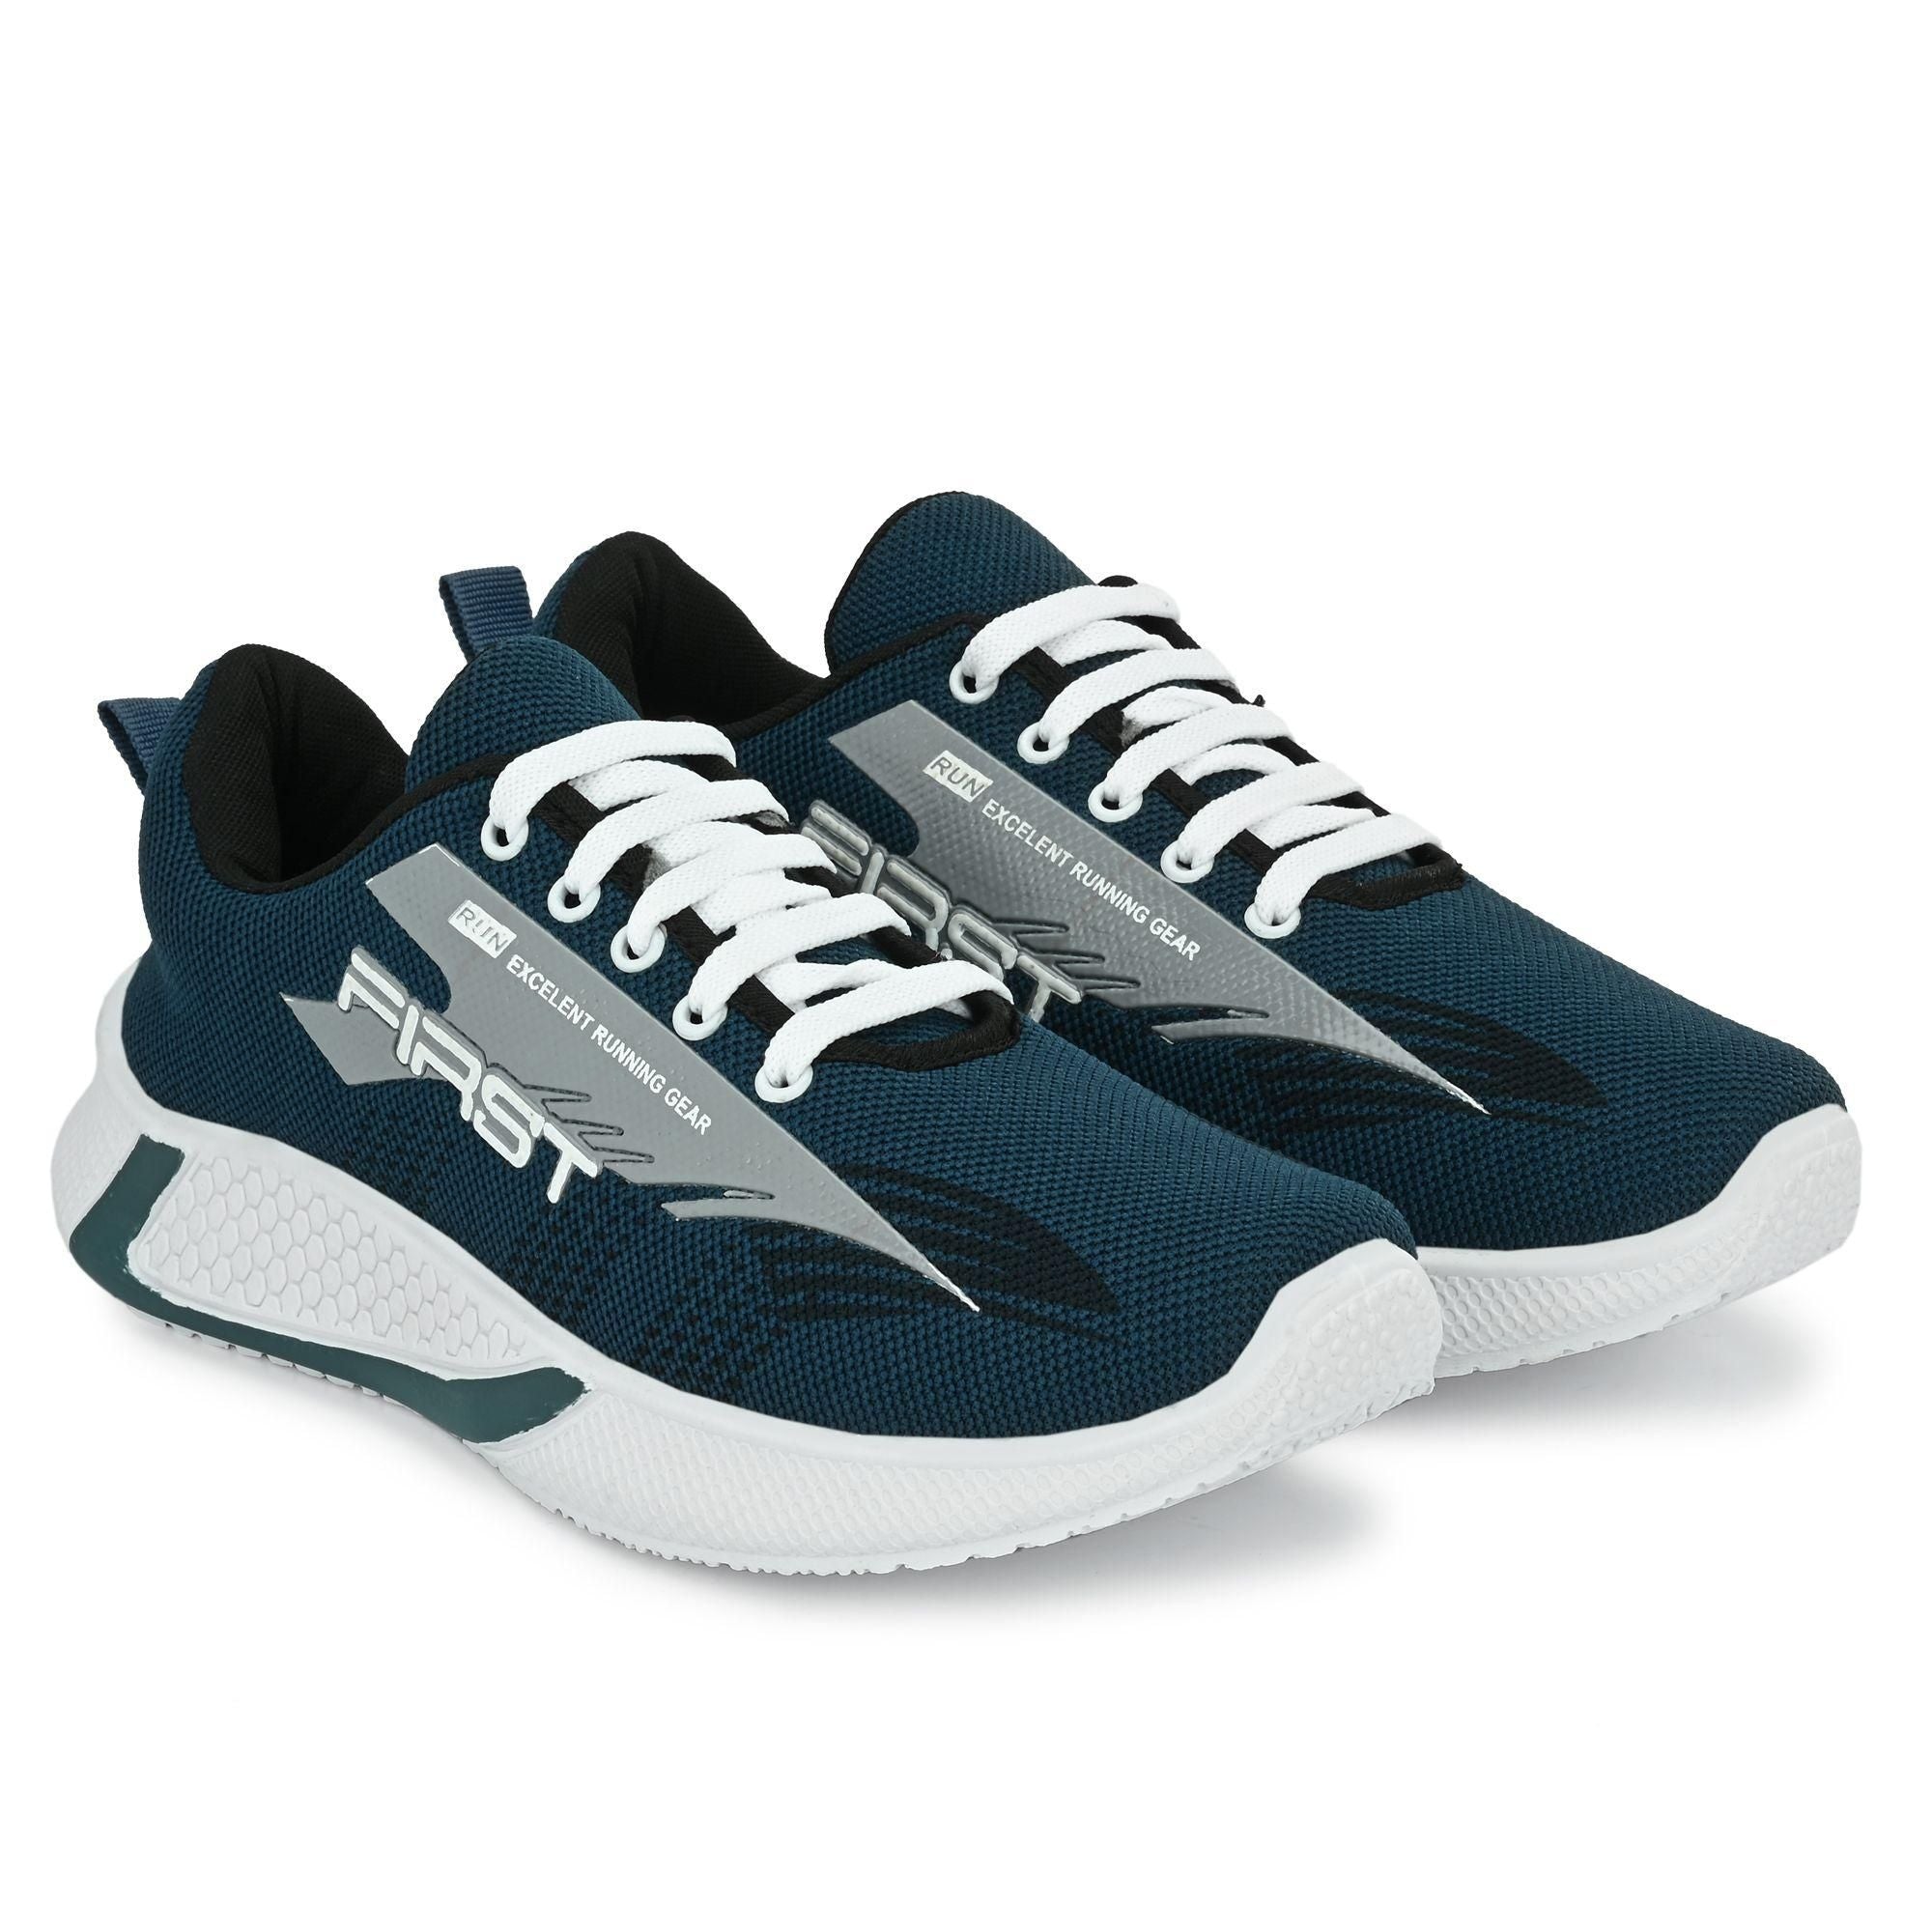 Men's Light Weight Air Force Blue Sports Shoes - Adorable Me